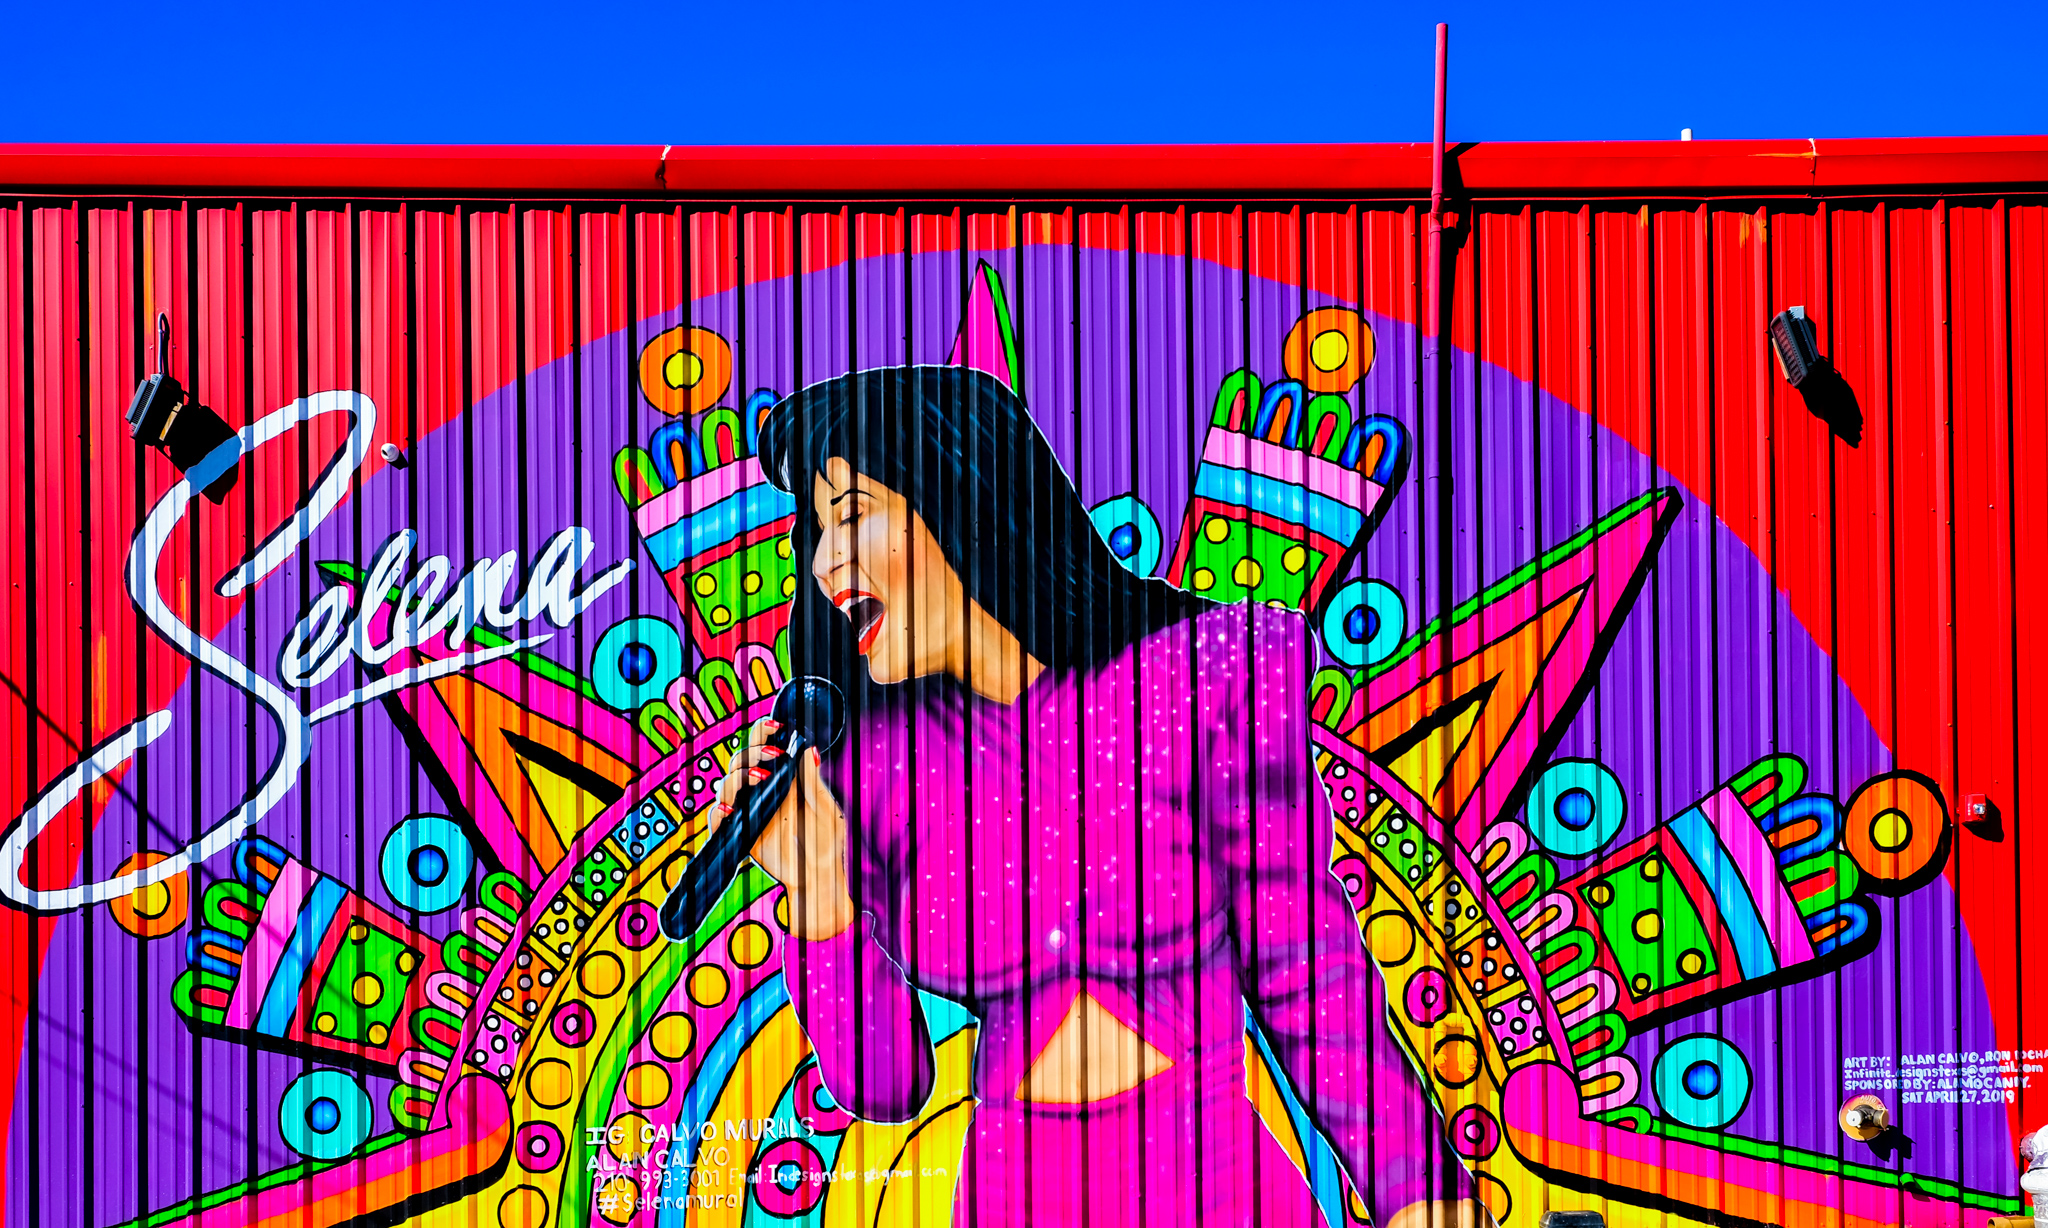 Selena singing into a microphone, against a background with bright colors and Aztec-inspired pattern.